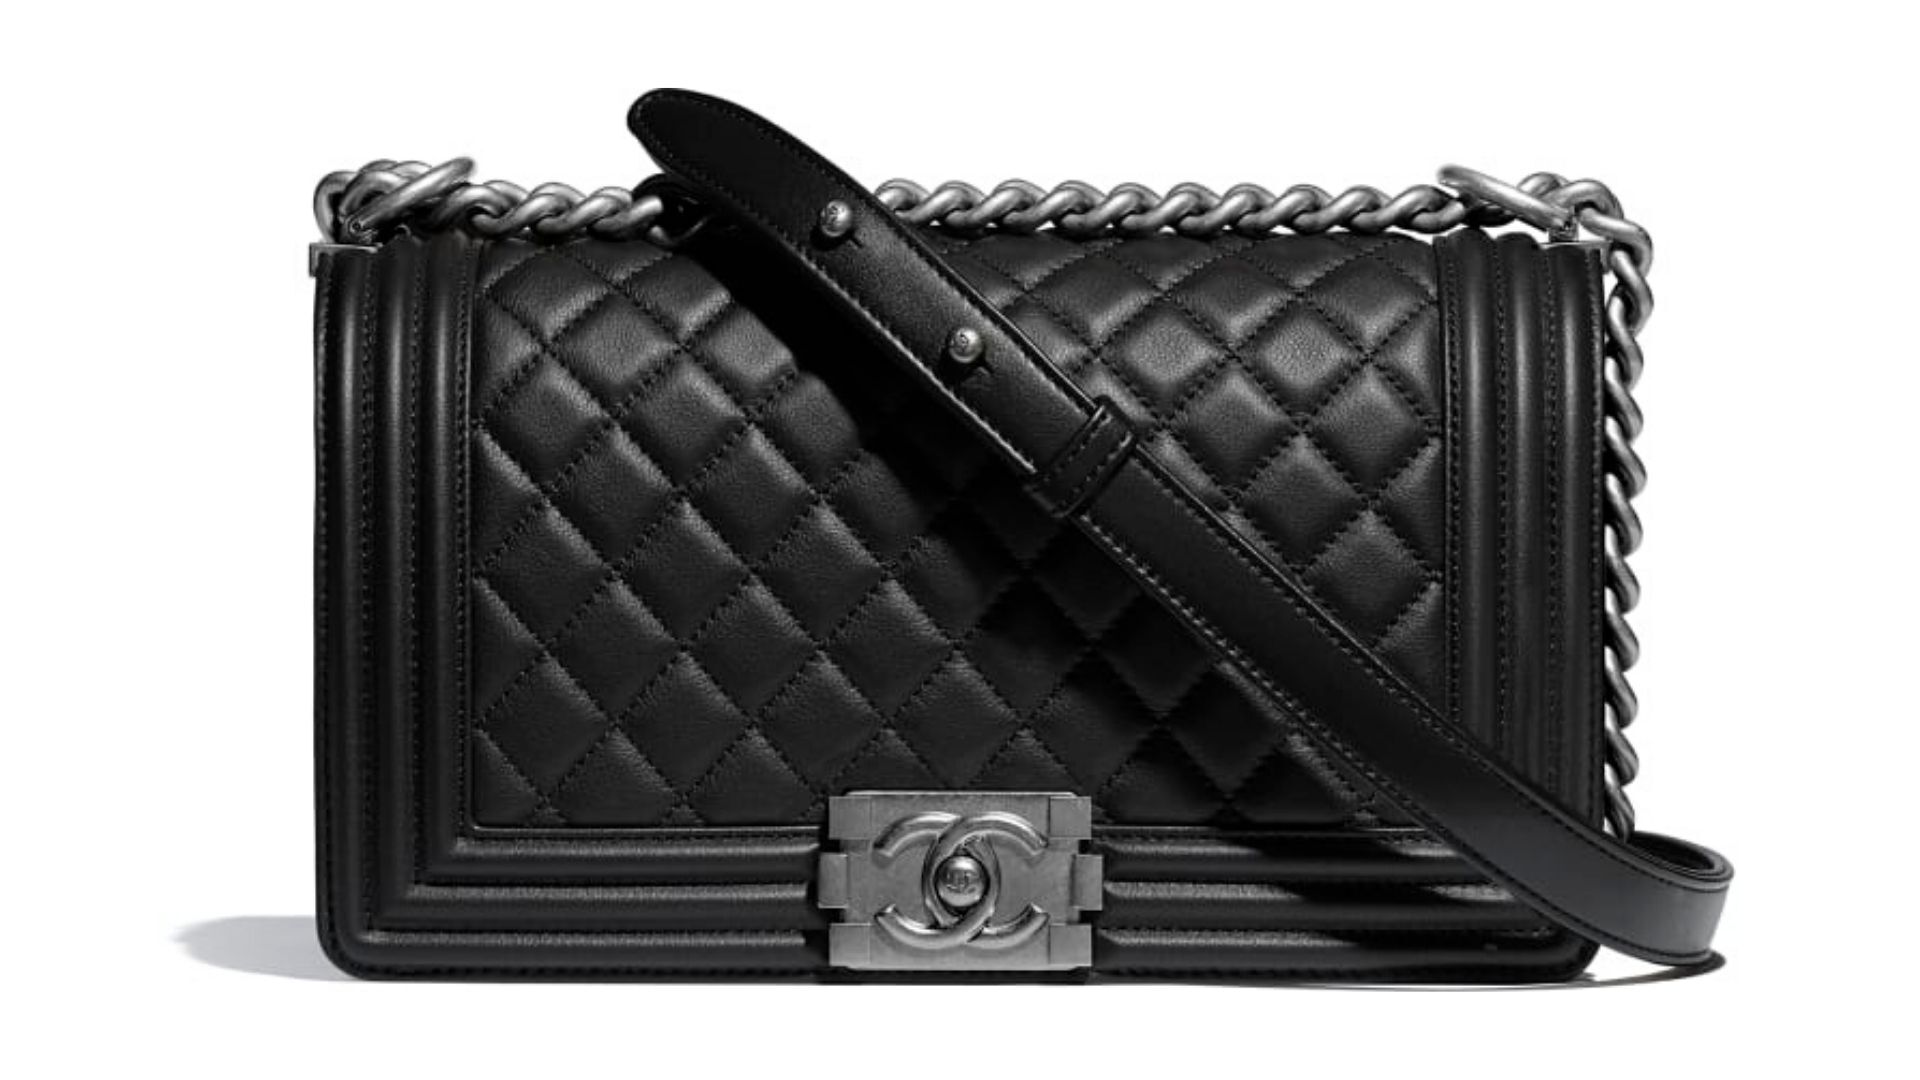 Memory Lane: The 10 Most Iconic Chanel Handbags of All Time